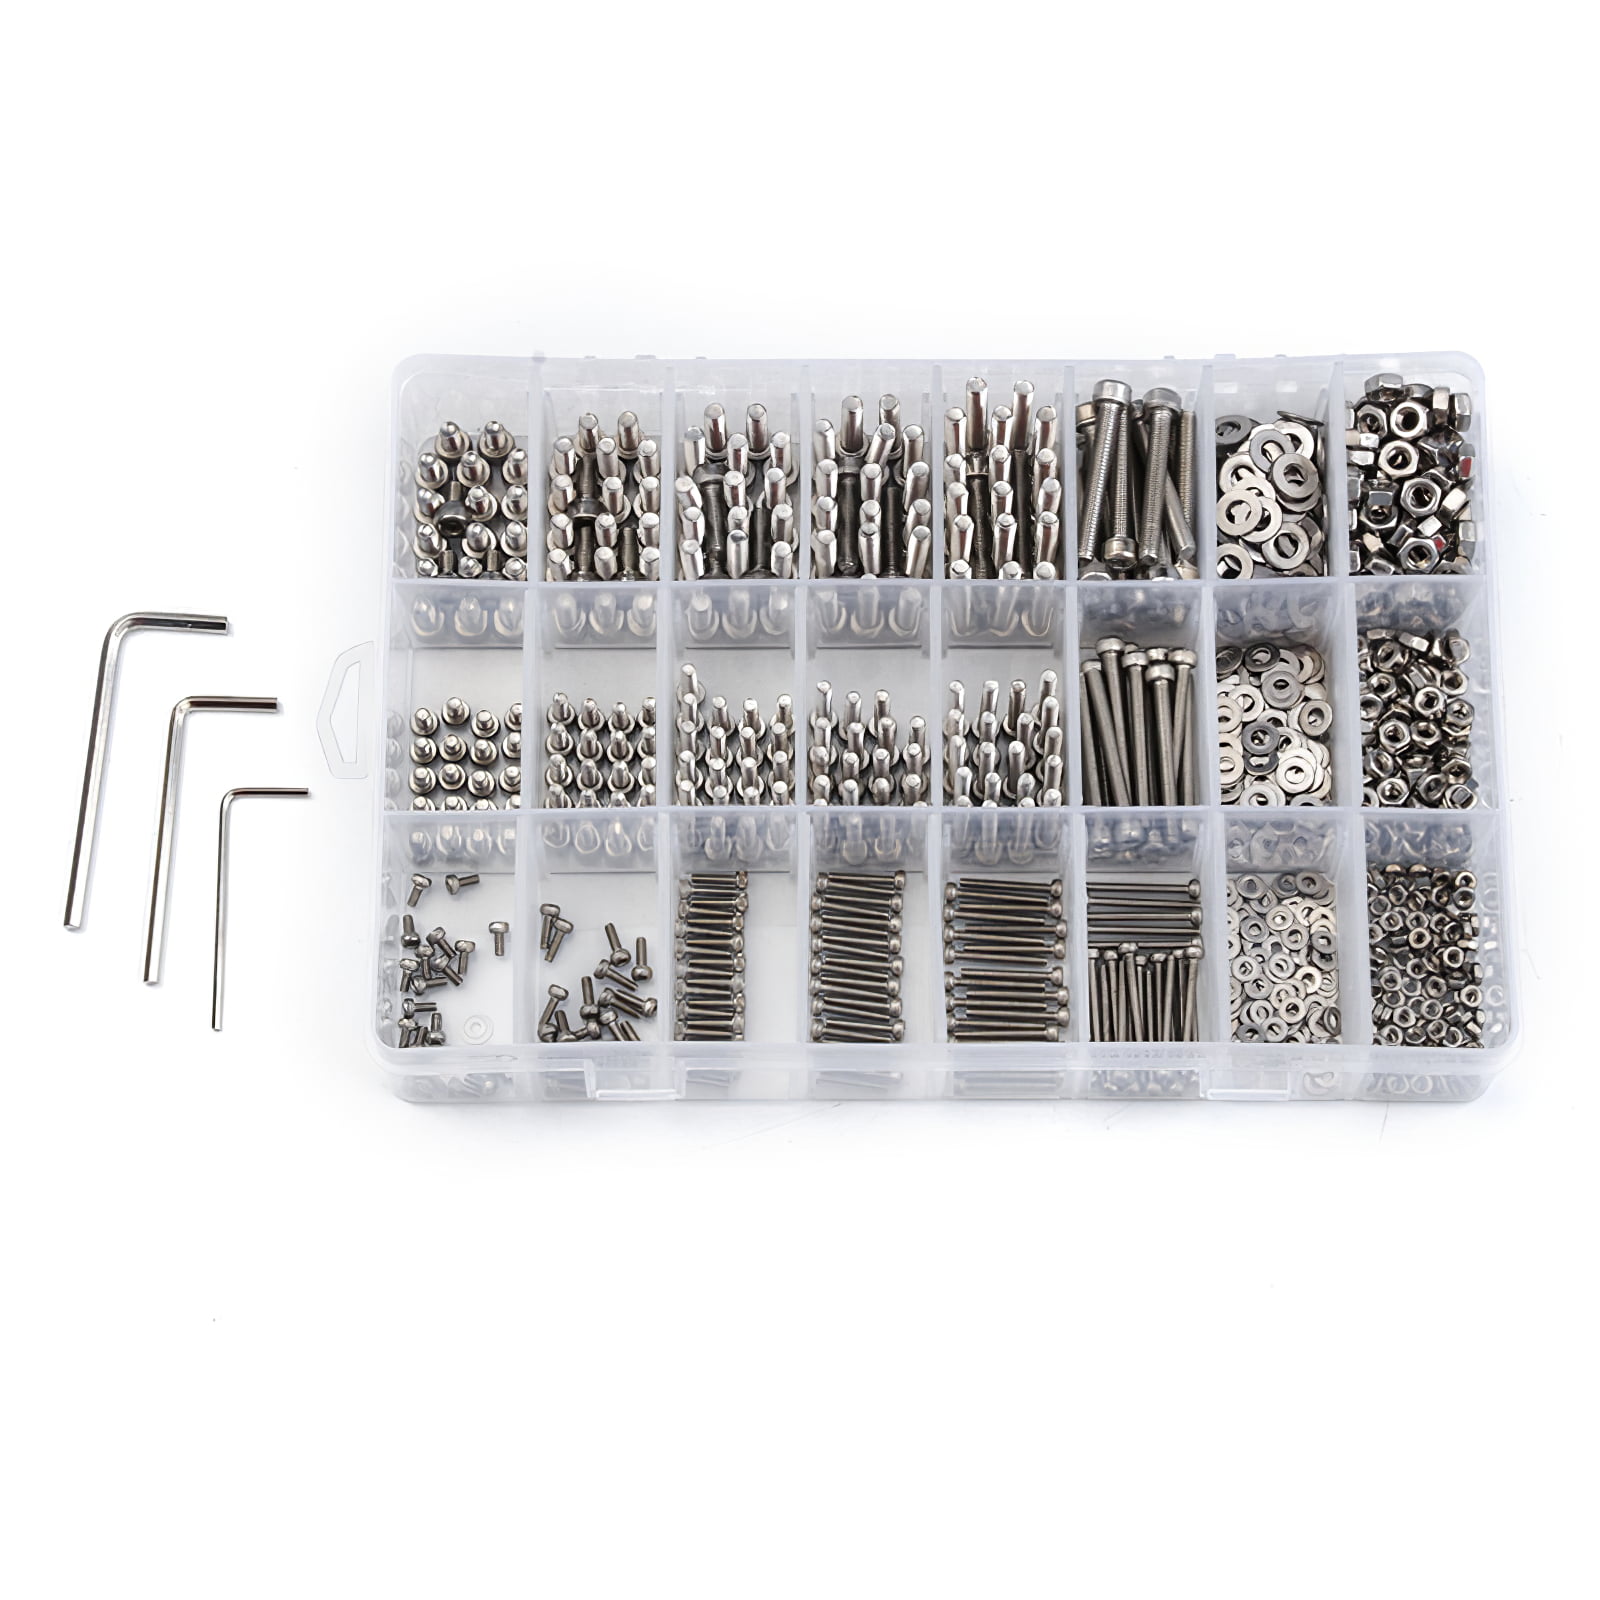 1080pcs M3 M4 M5 Stainless Steel Hex Head Screws & Nuts & Washers Kit With Box 